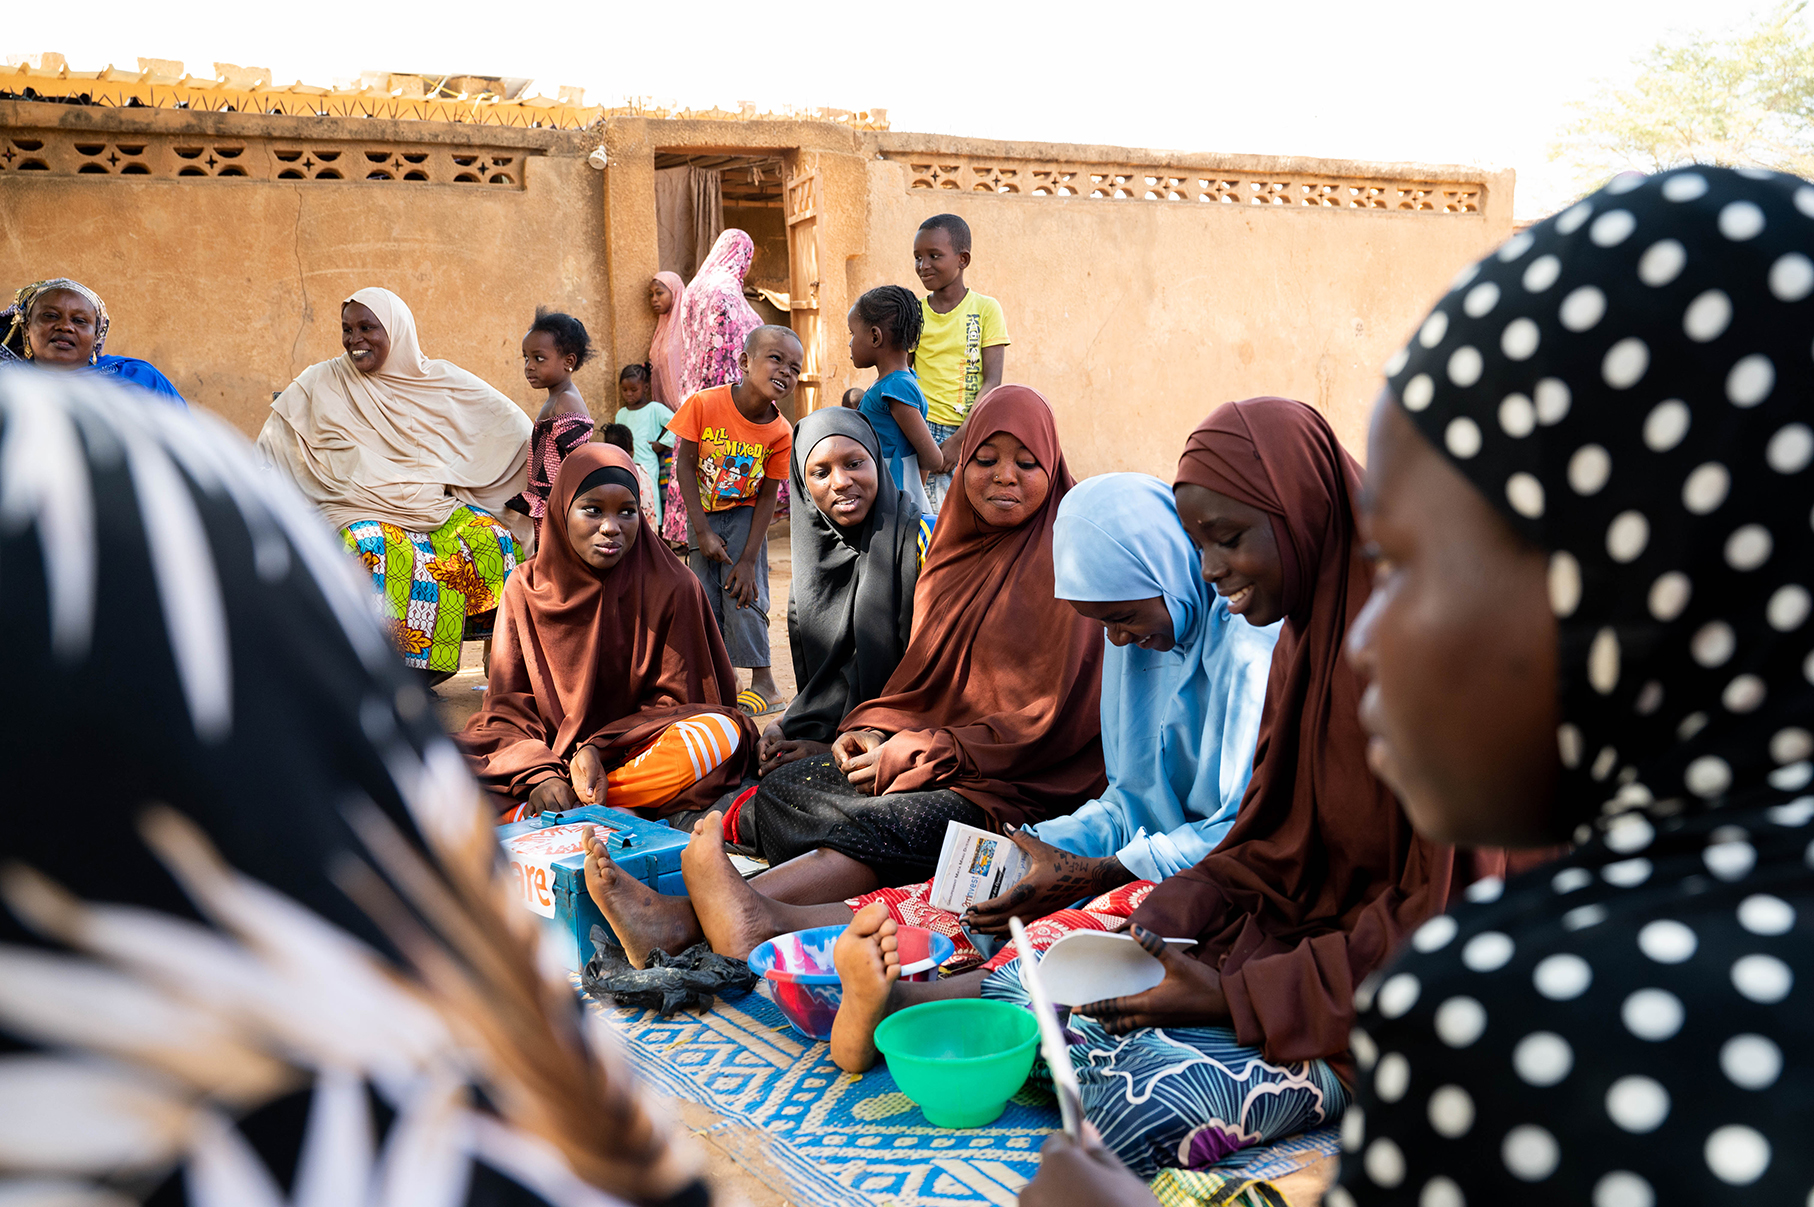 A group of youth entrepreneurs that meet every week after school in Niamey, Nigeria. Ylva Seiff Berge/CARE Norway